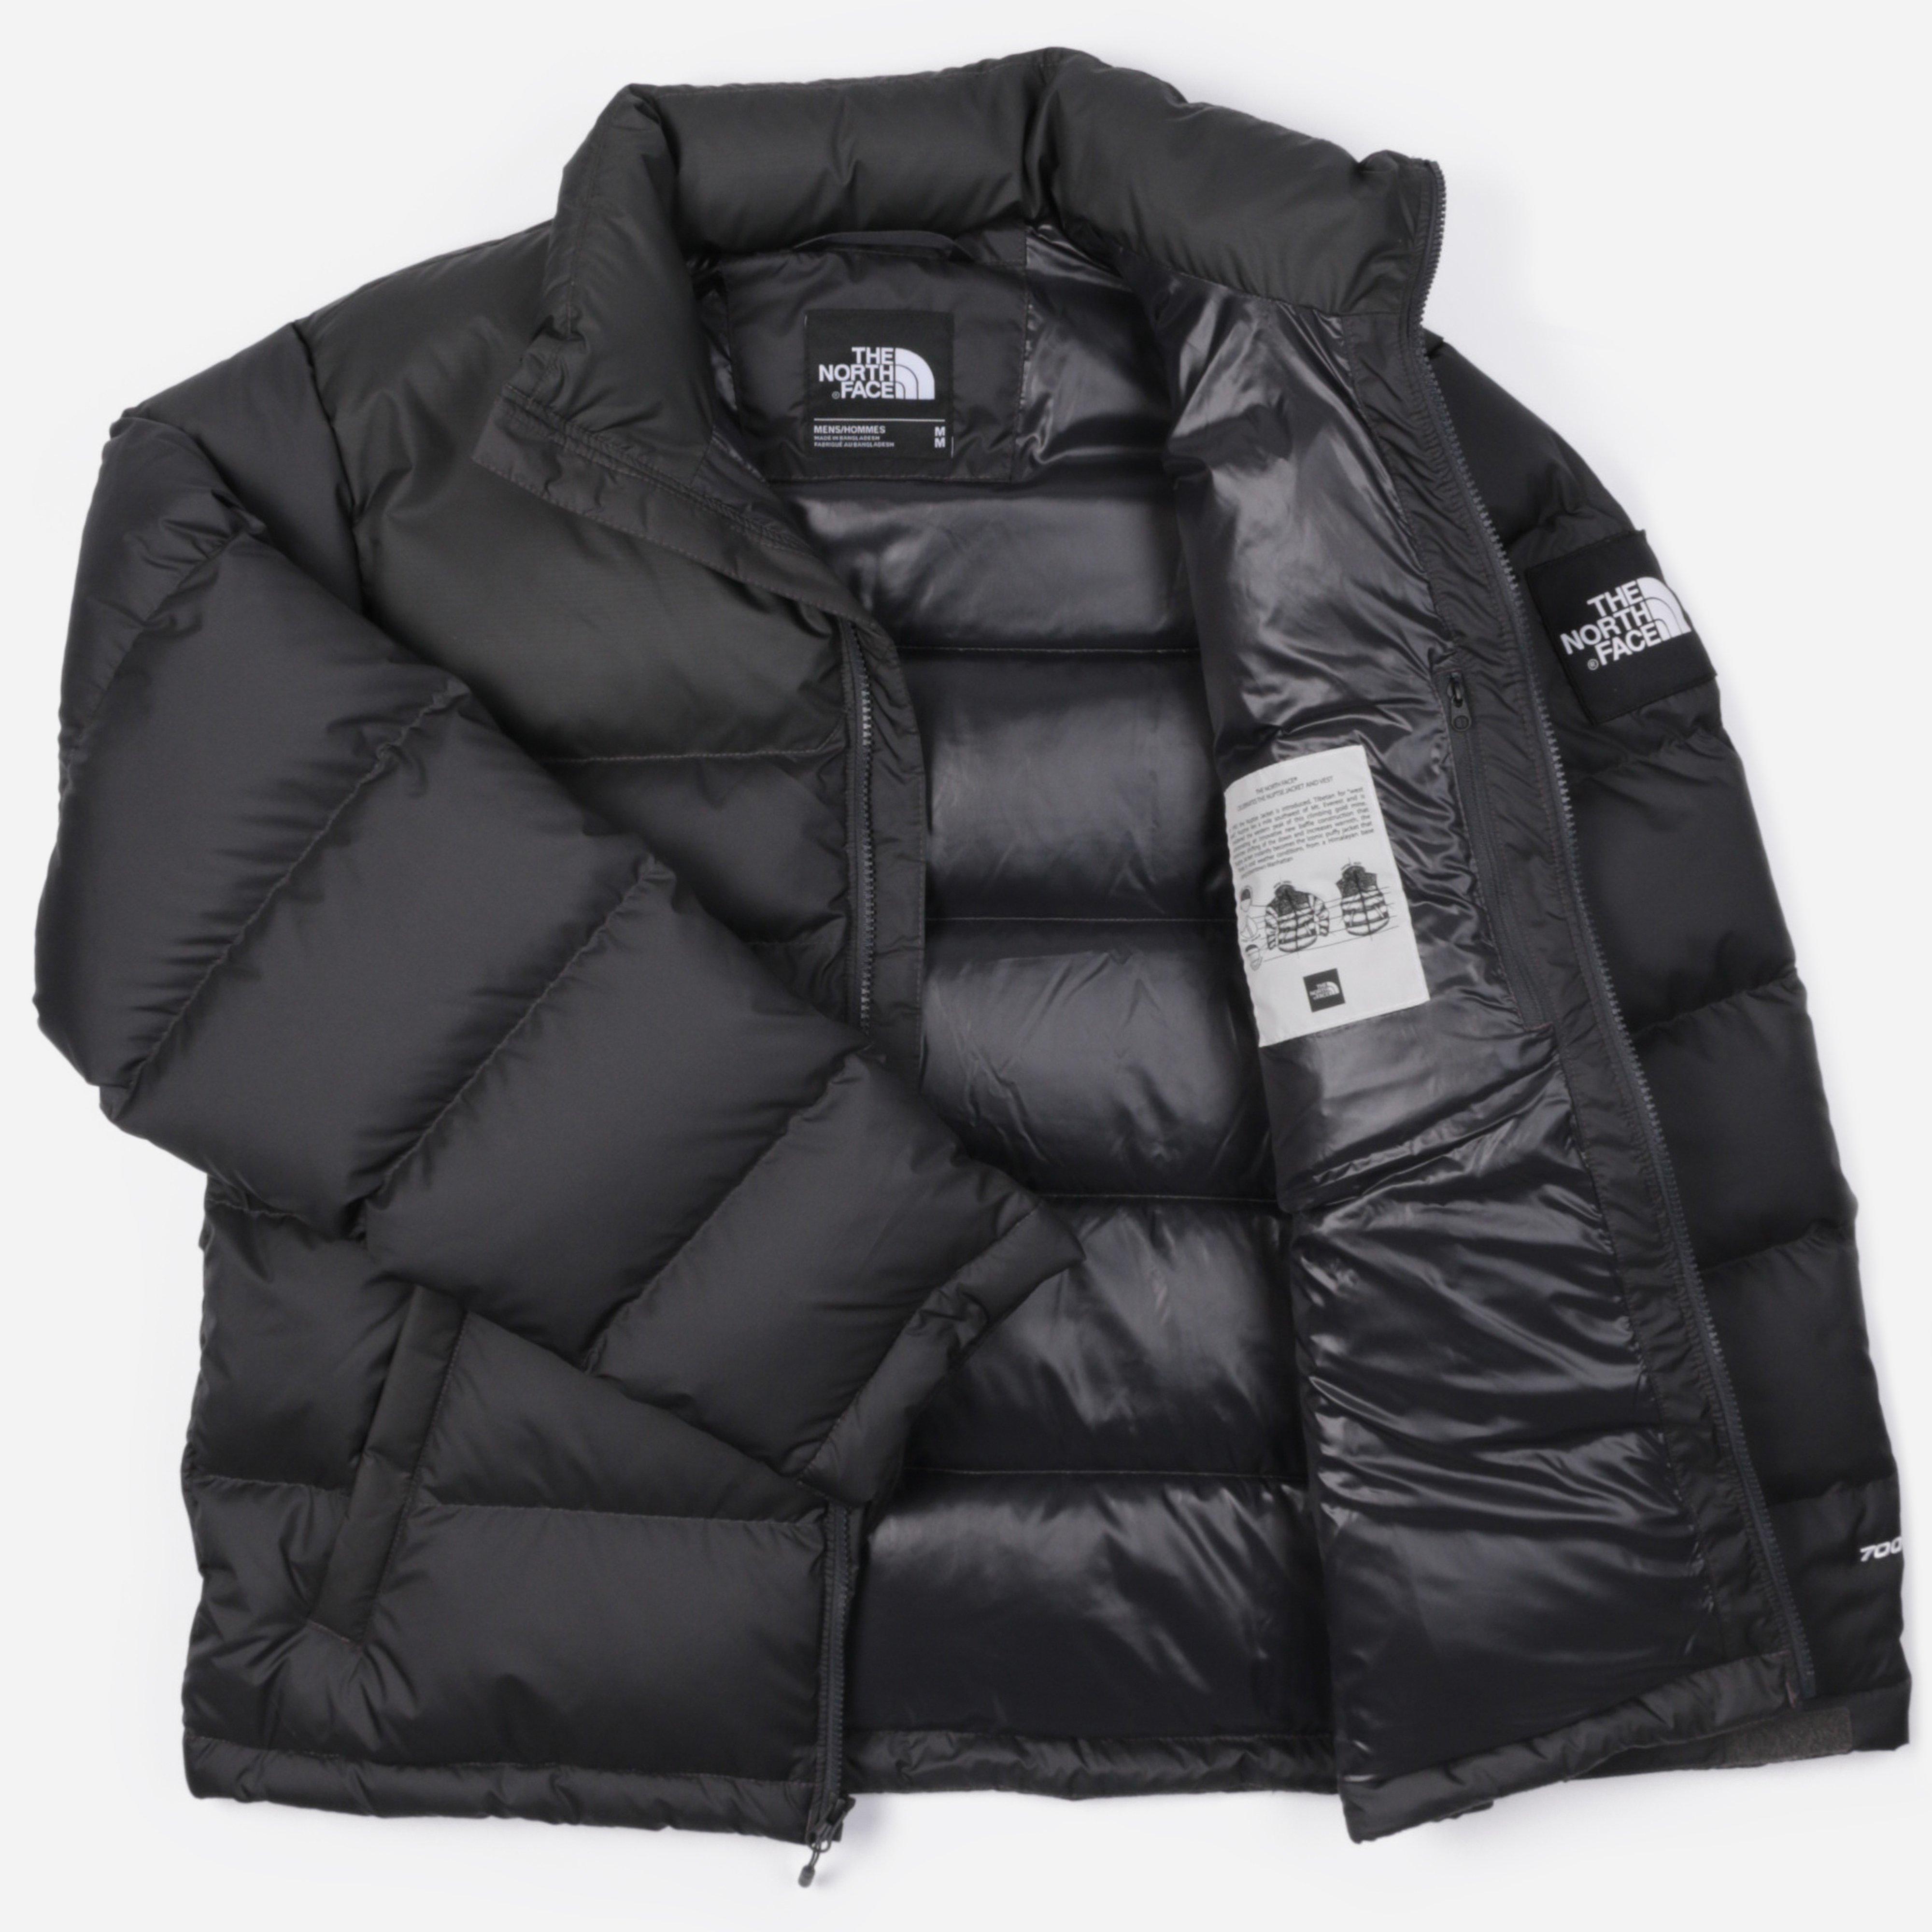 The North Face Synthetic 1992 Nuptse Jacket in Black for Men - Lyst